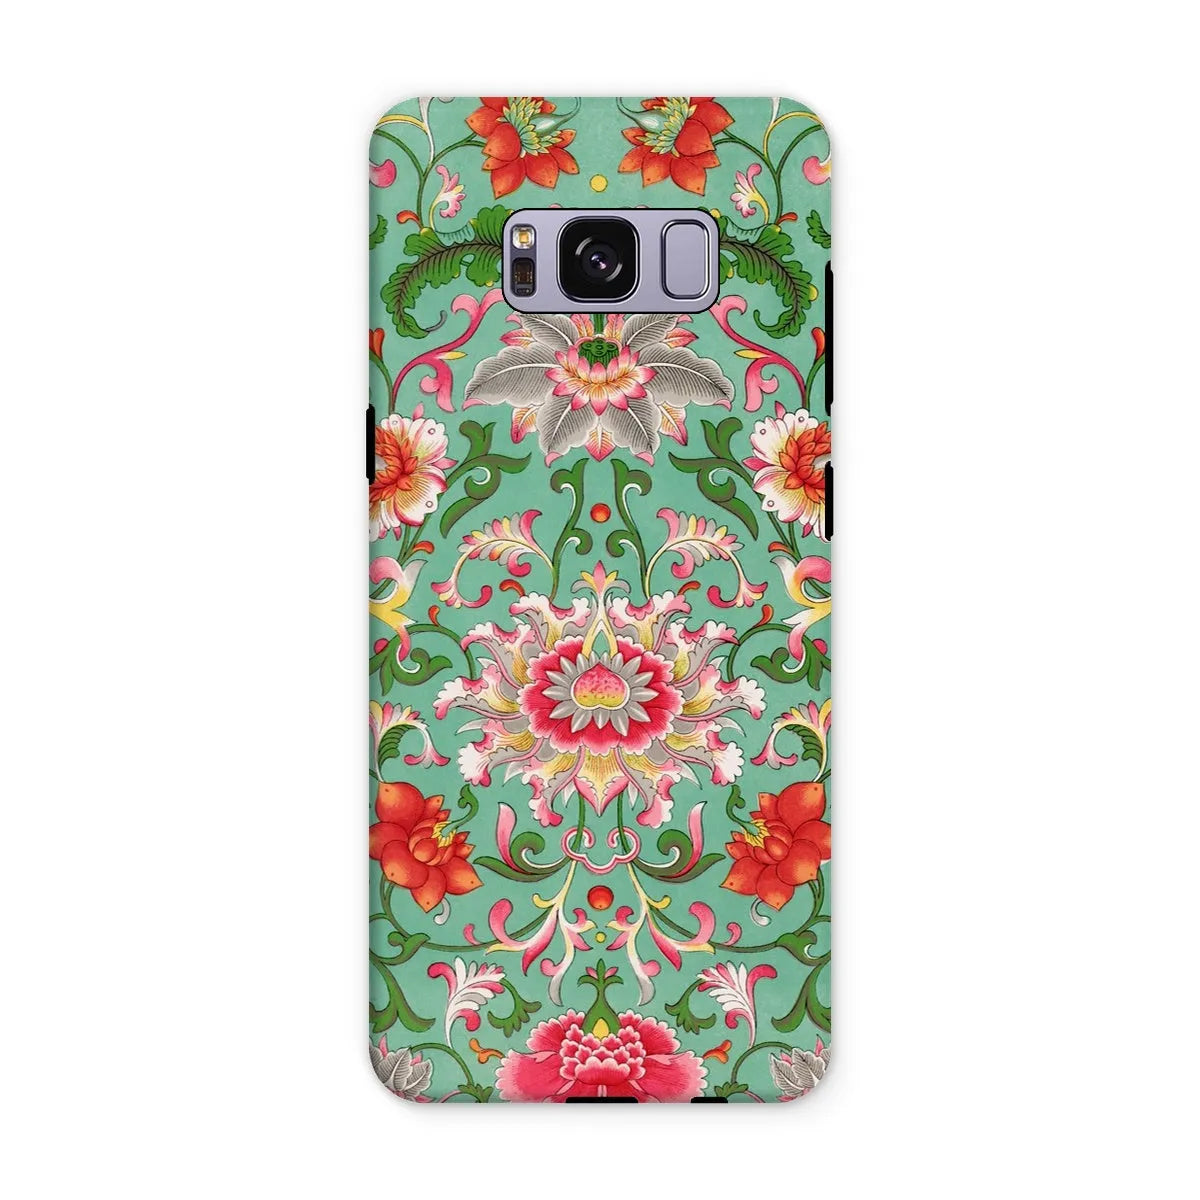 Chinese Floral Aesthetic Art Phone Case - Owen Jones - Samsung Galaxy S8 Plus / Matte - Mobile Phone Cases - Aesthetic